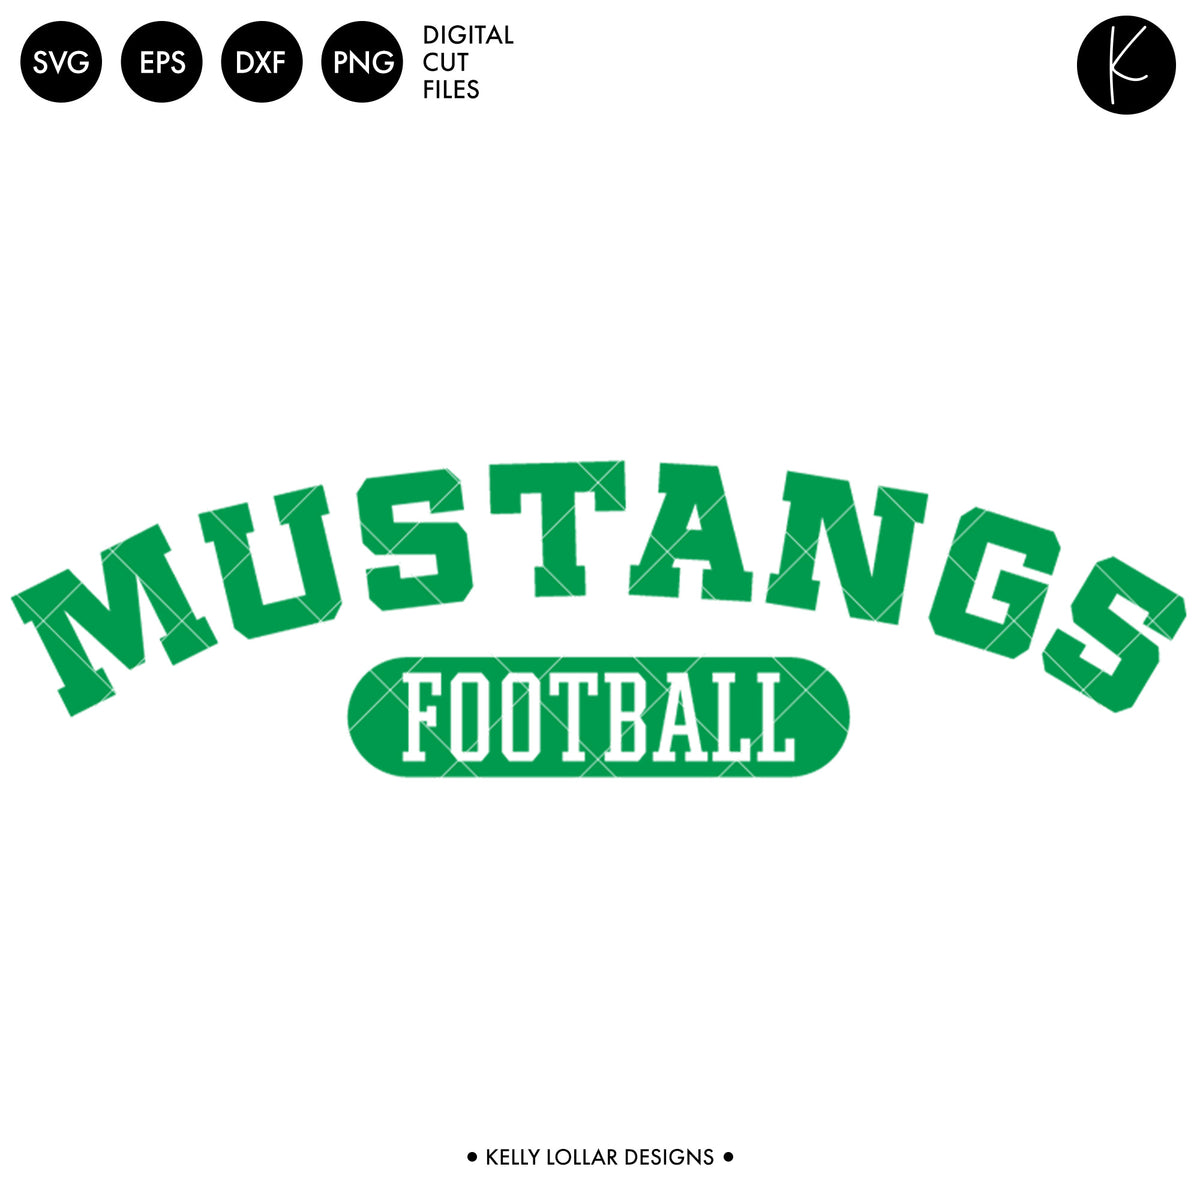 Mustangs Soccer and Football Bundle | SVG DXF EPS PNG Cut Files